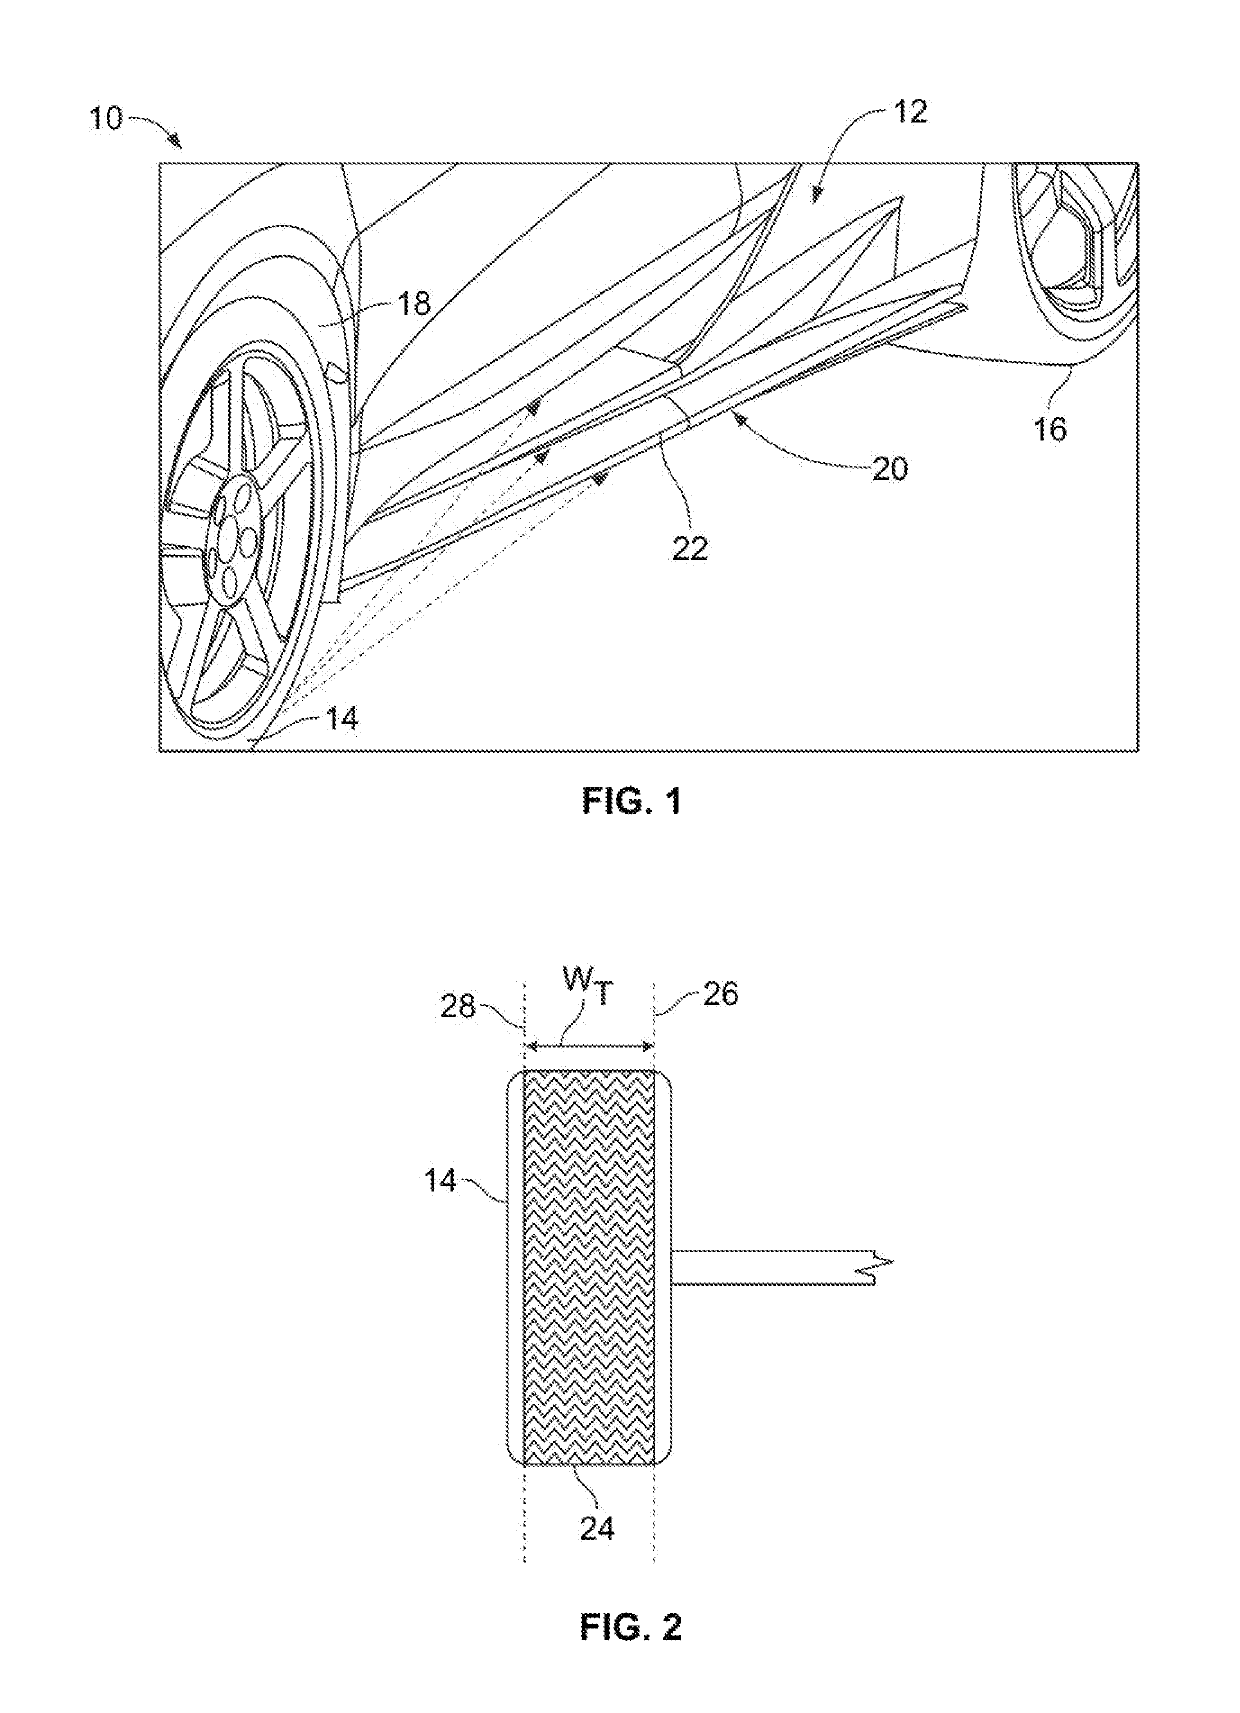 Deployable debris protection device for an automotive vehicle